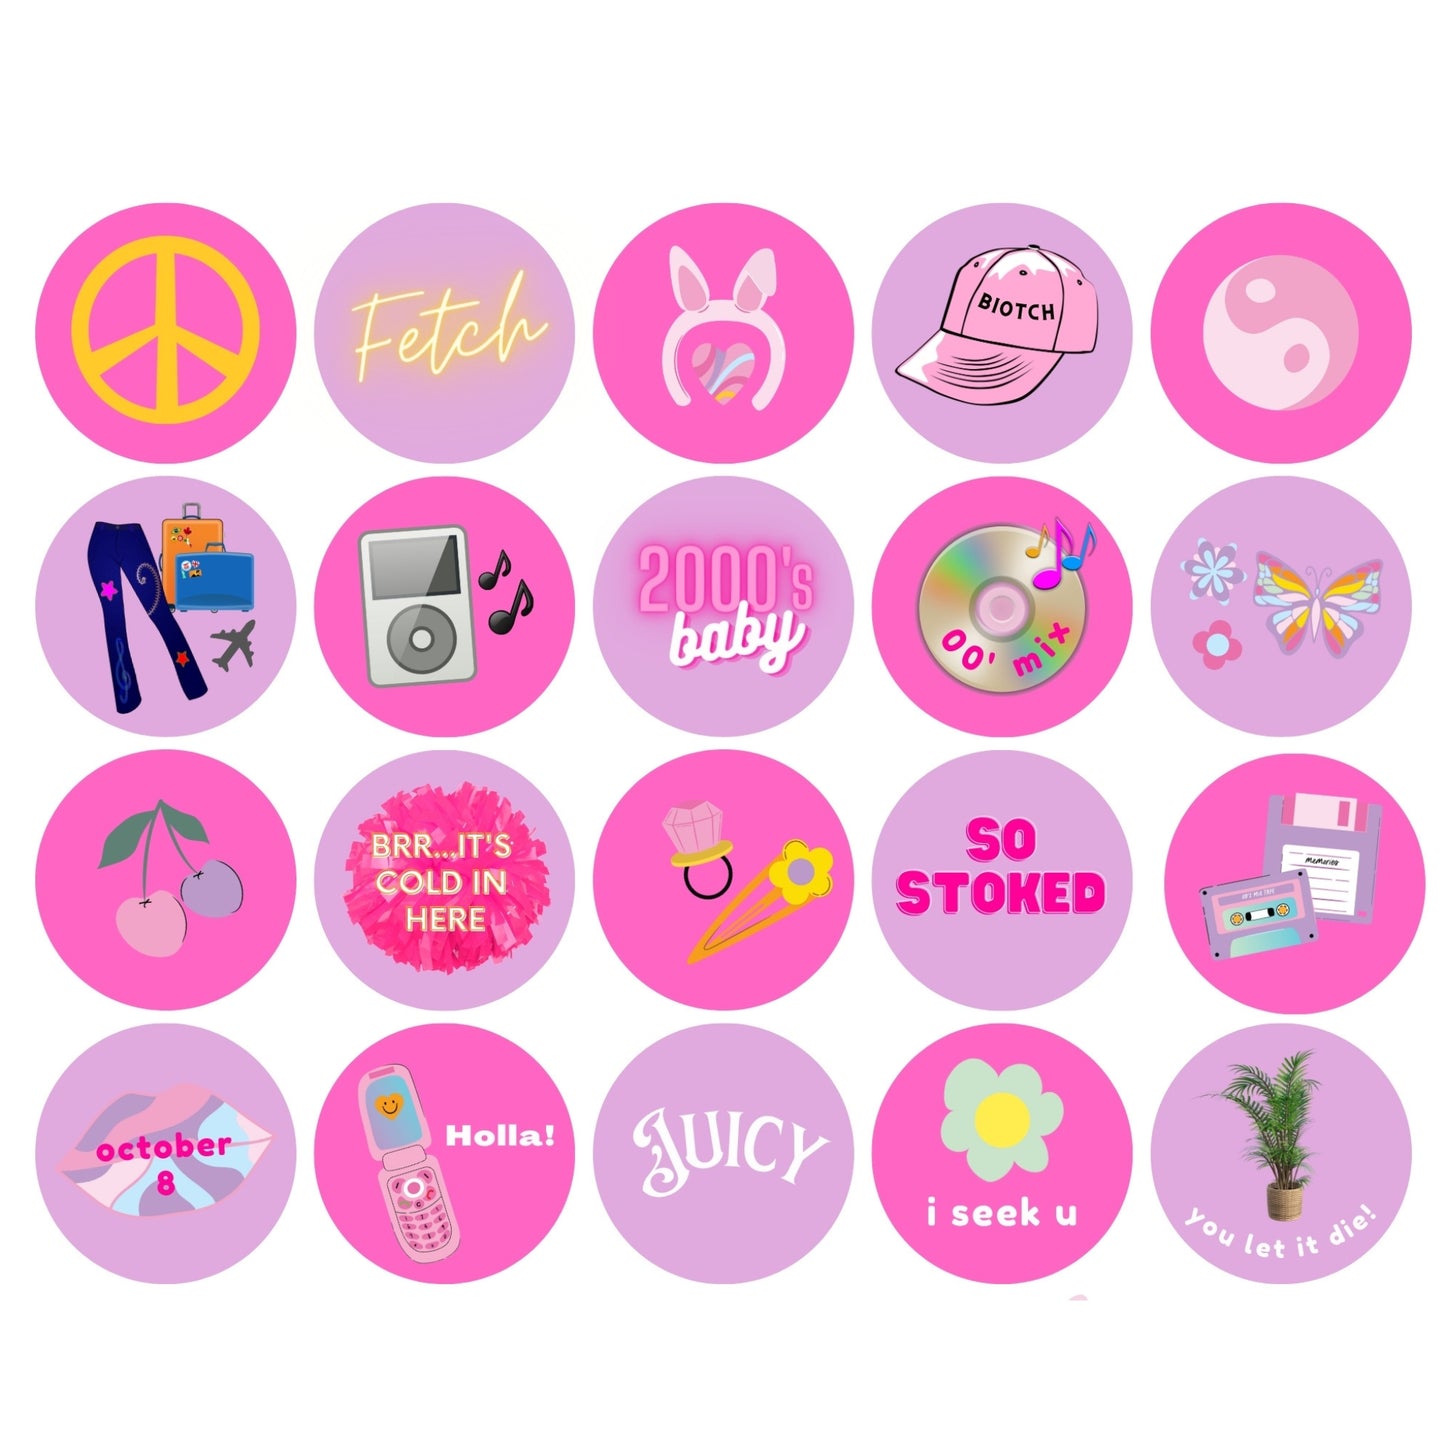 2000s Party Cupcake Toppers Printables